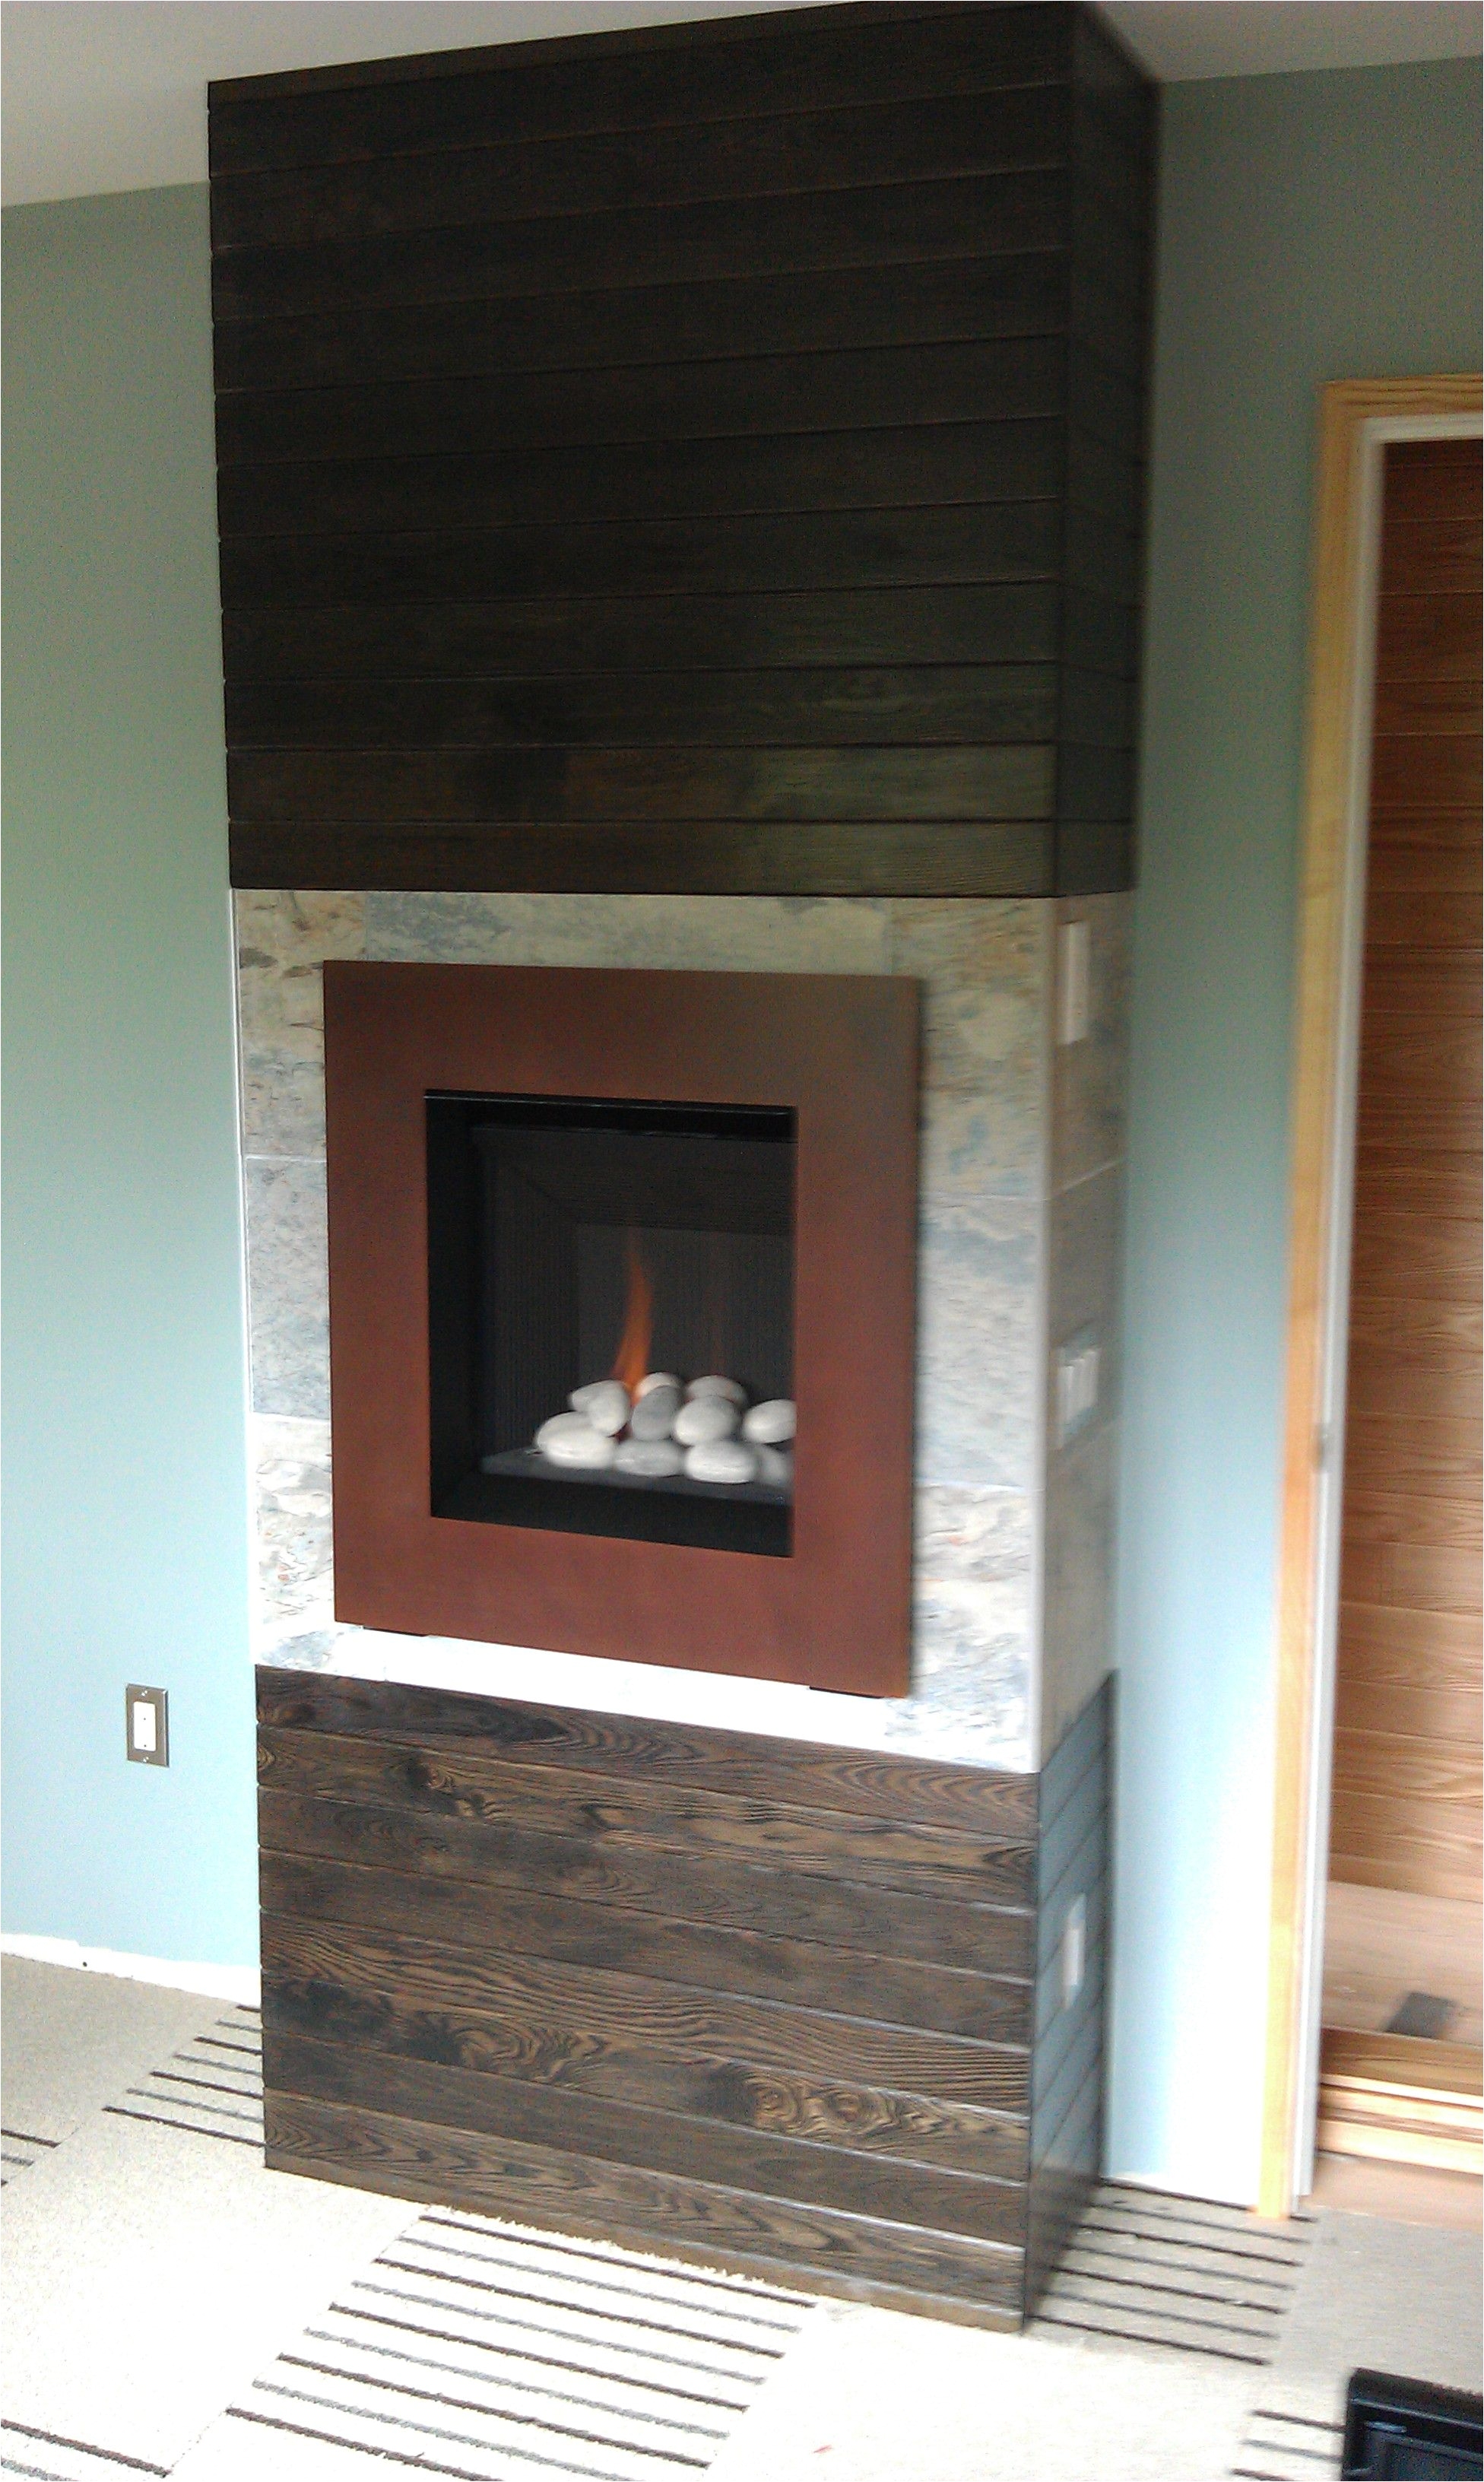 valor 530irn ledge stone fire radiant gas fireplace and insert installed with patina front in masonry fireplace in basement